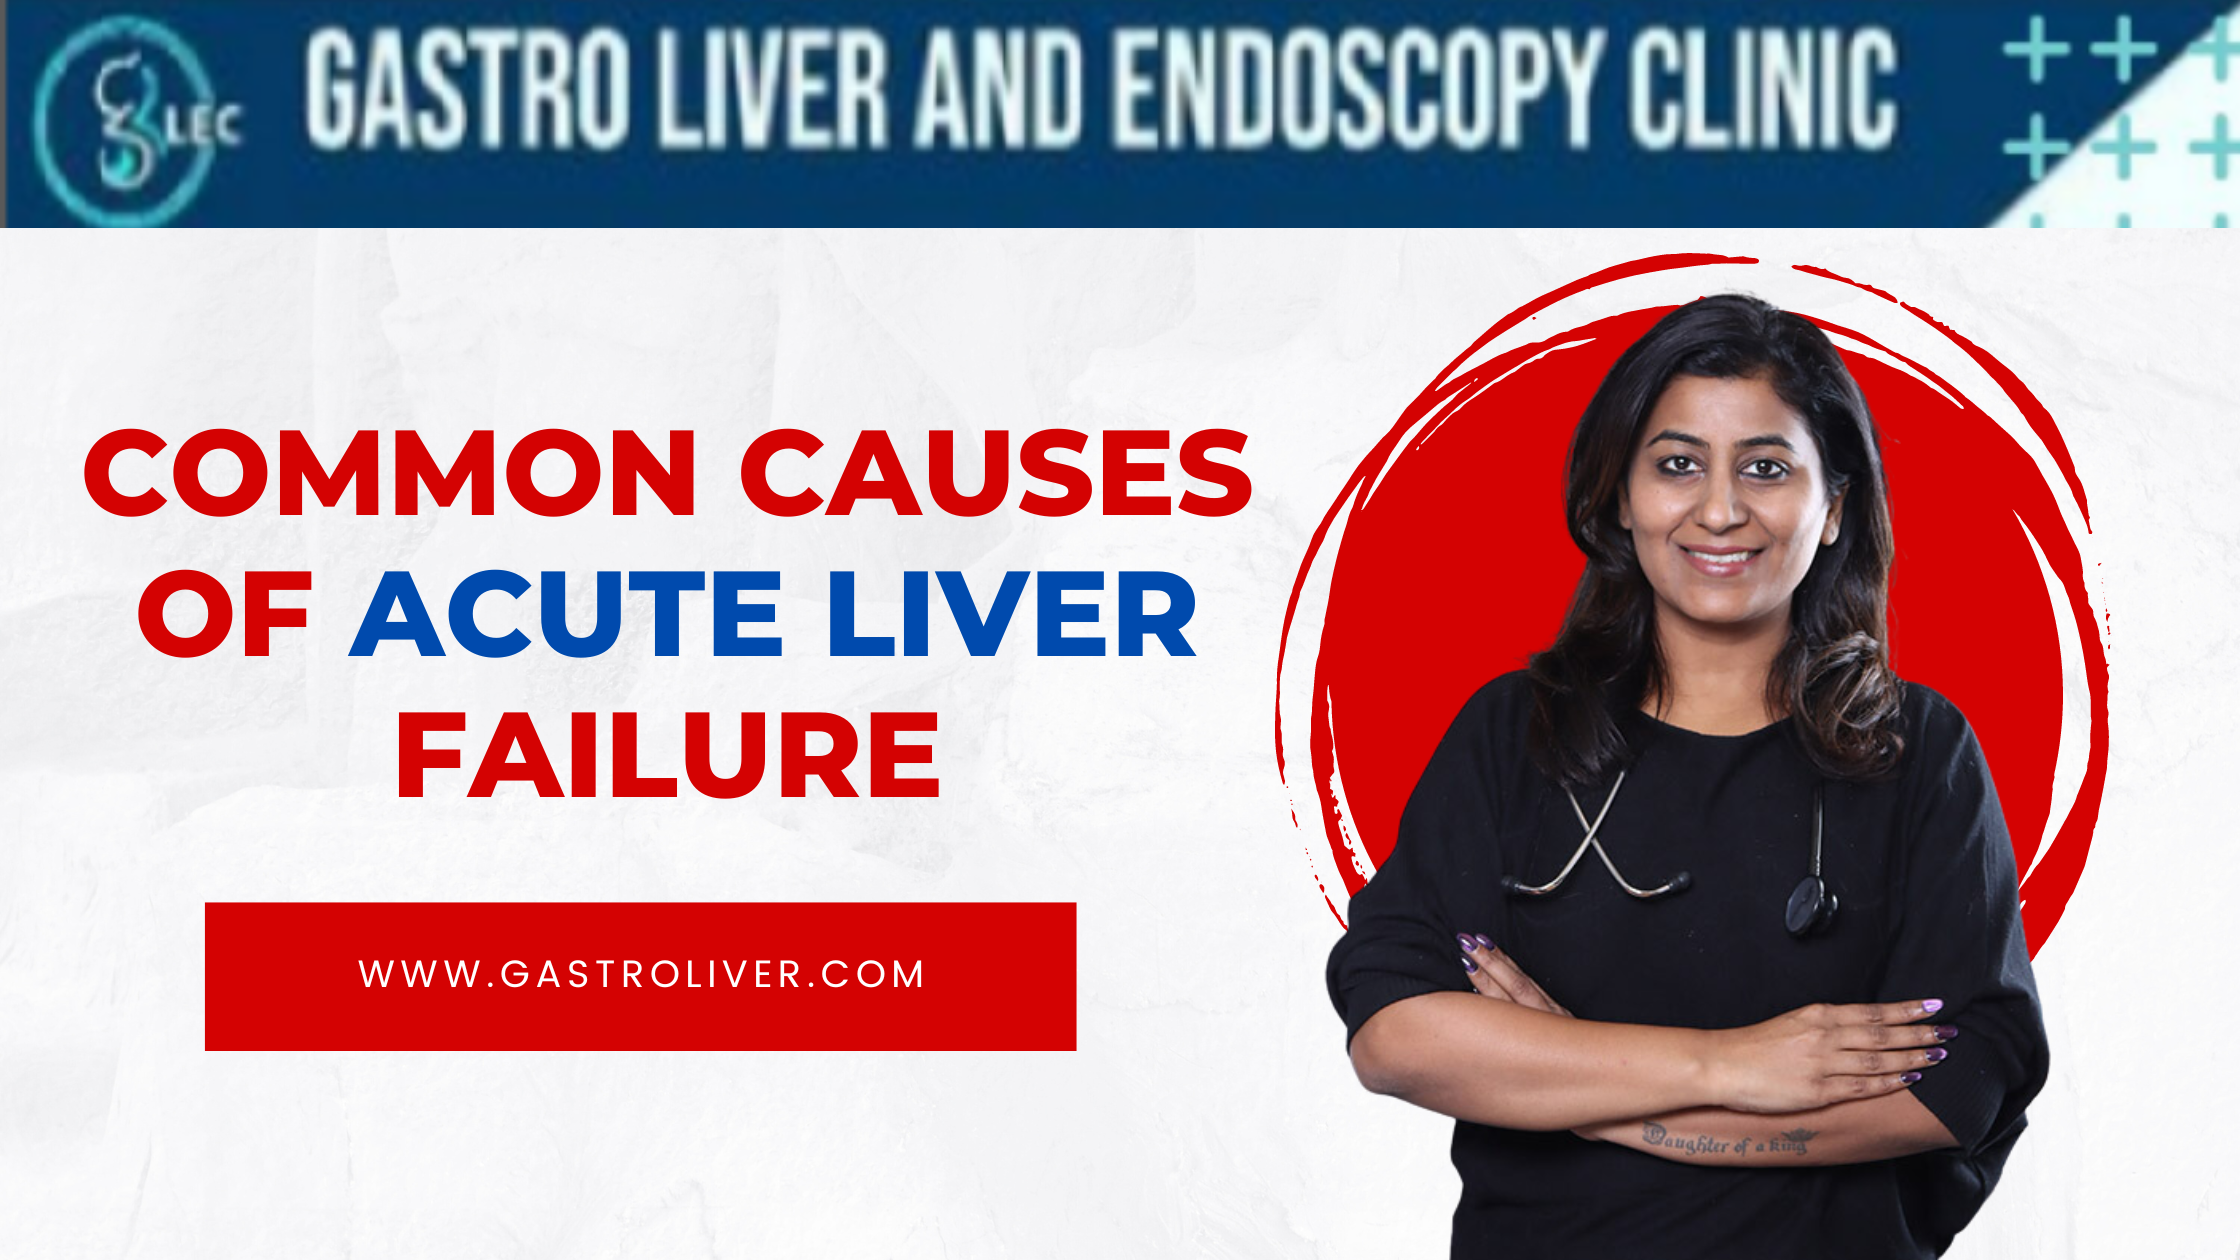 Common Causes of Acute Liver Failure